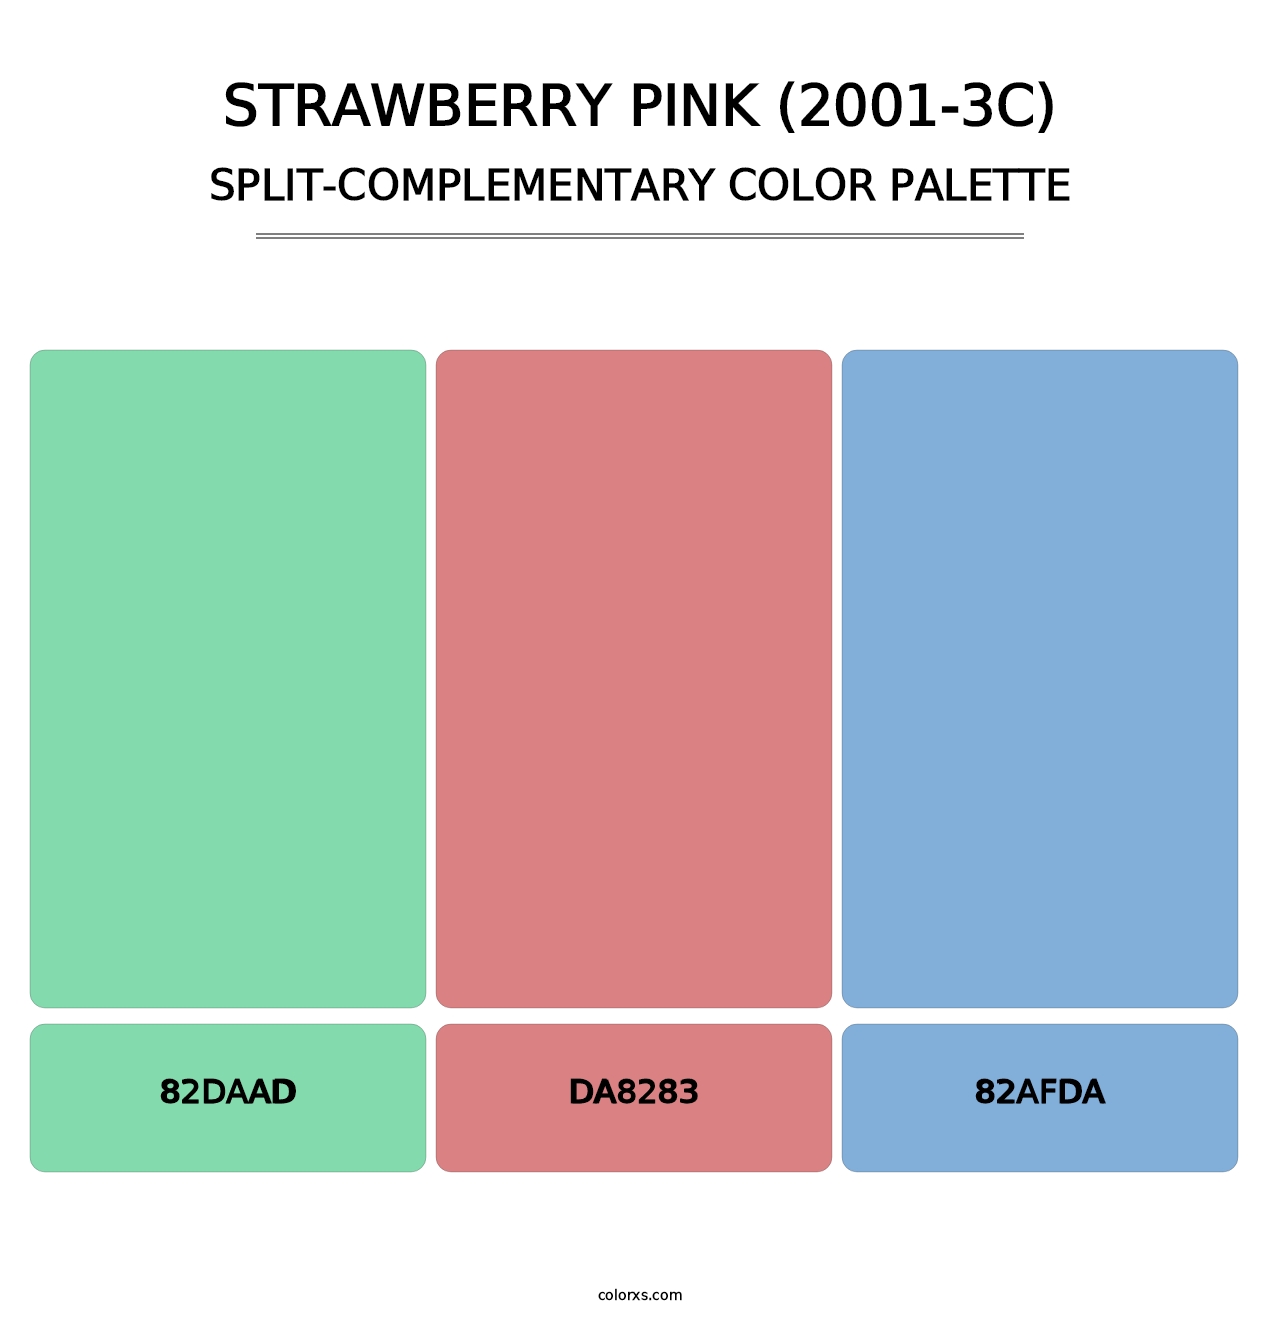 Strawberry Pink (2001-3C) - Split-Complementary Color Palette